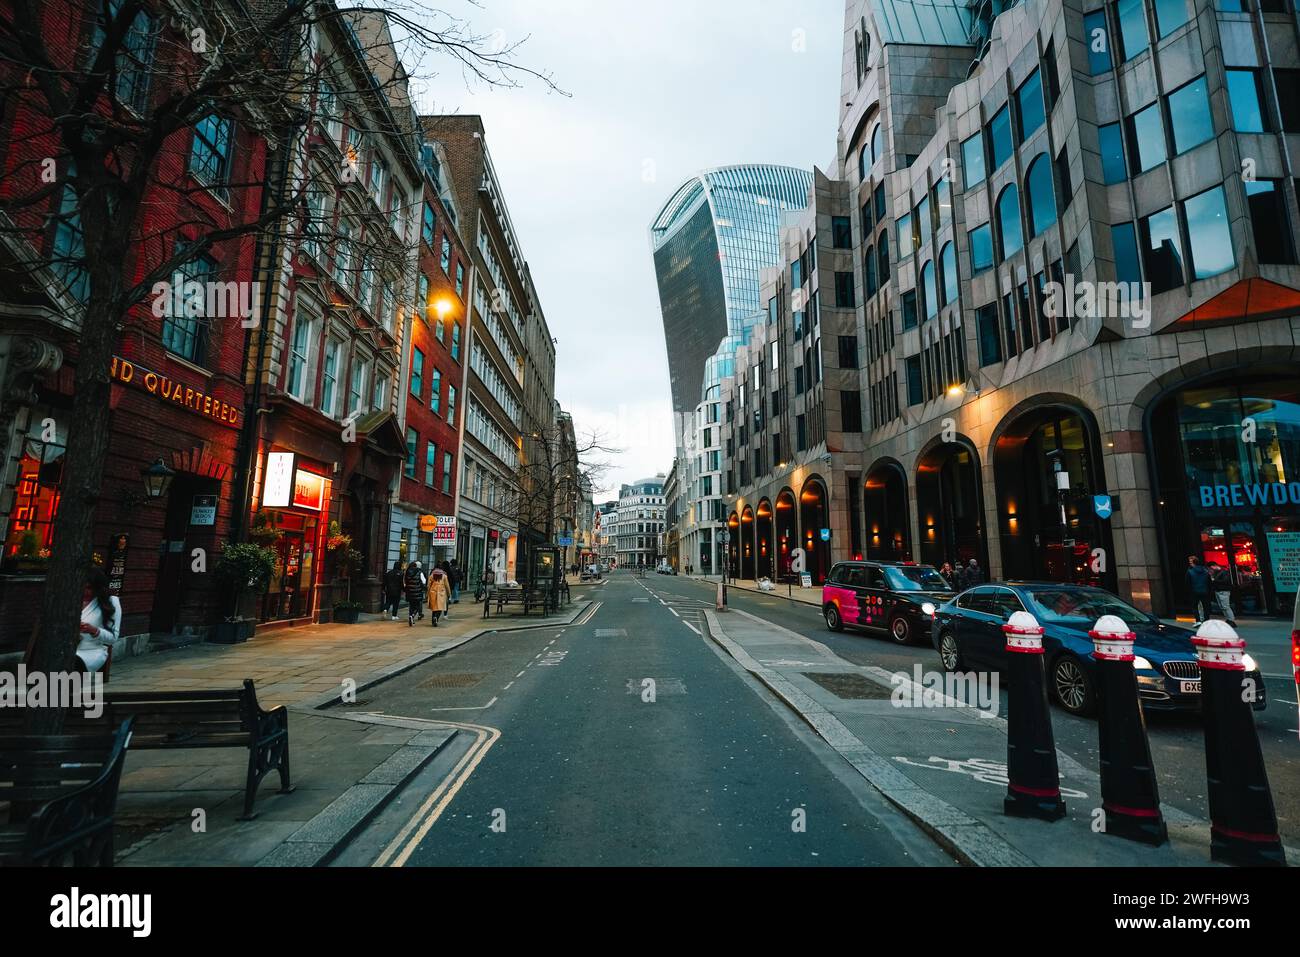 The cars driving on a bustling city street in downtown London Stock Photo